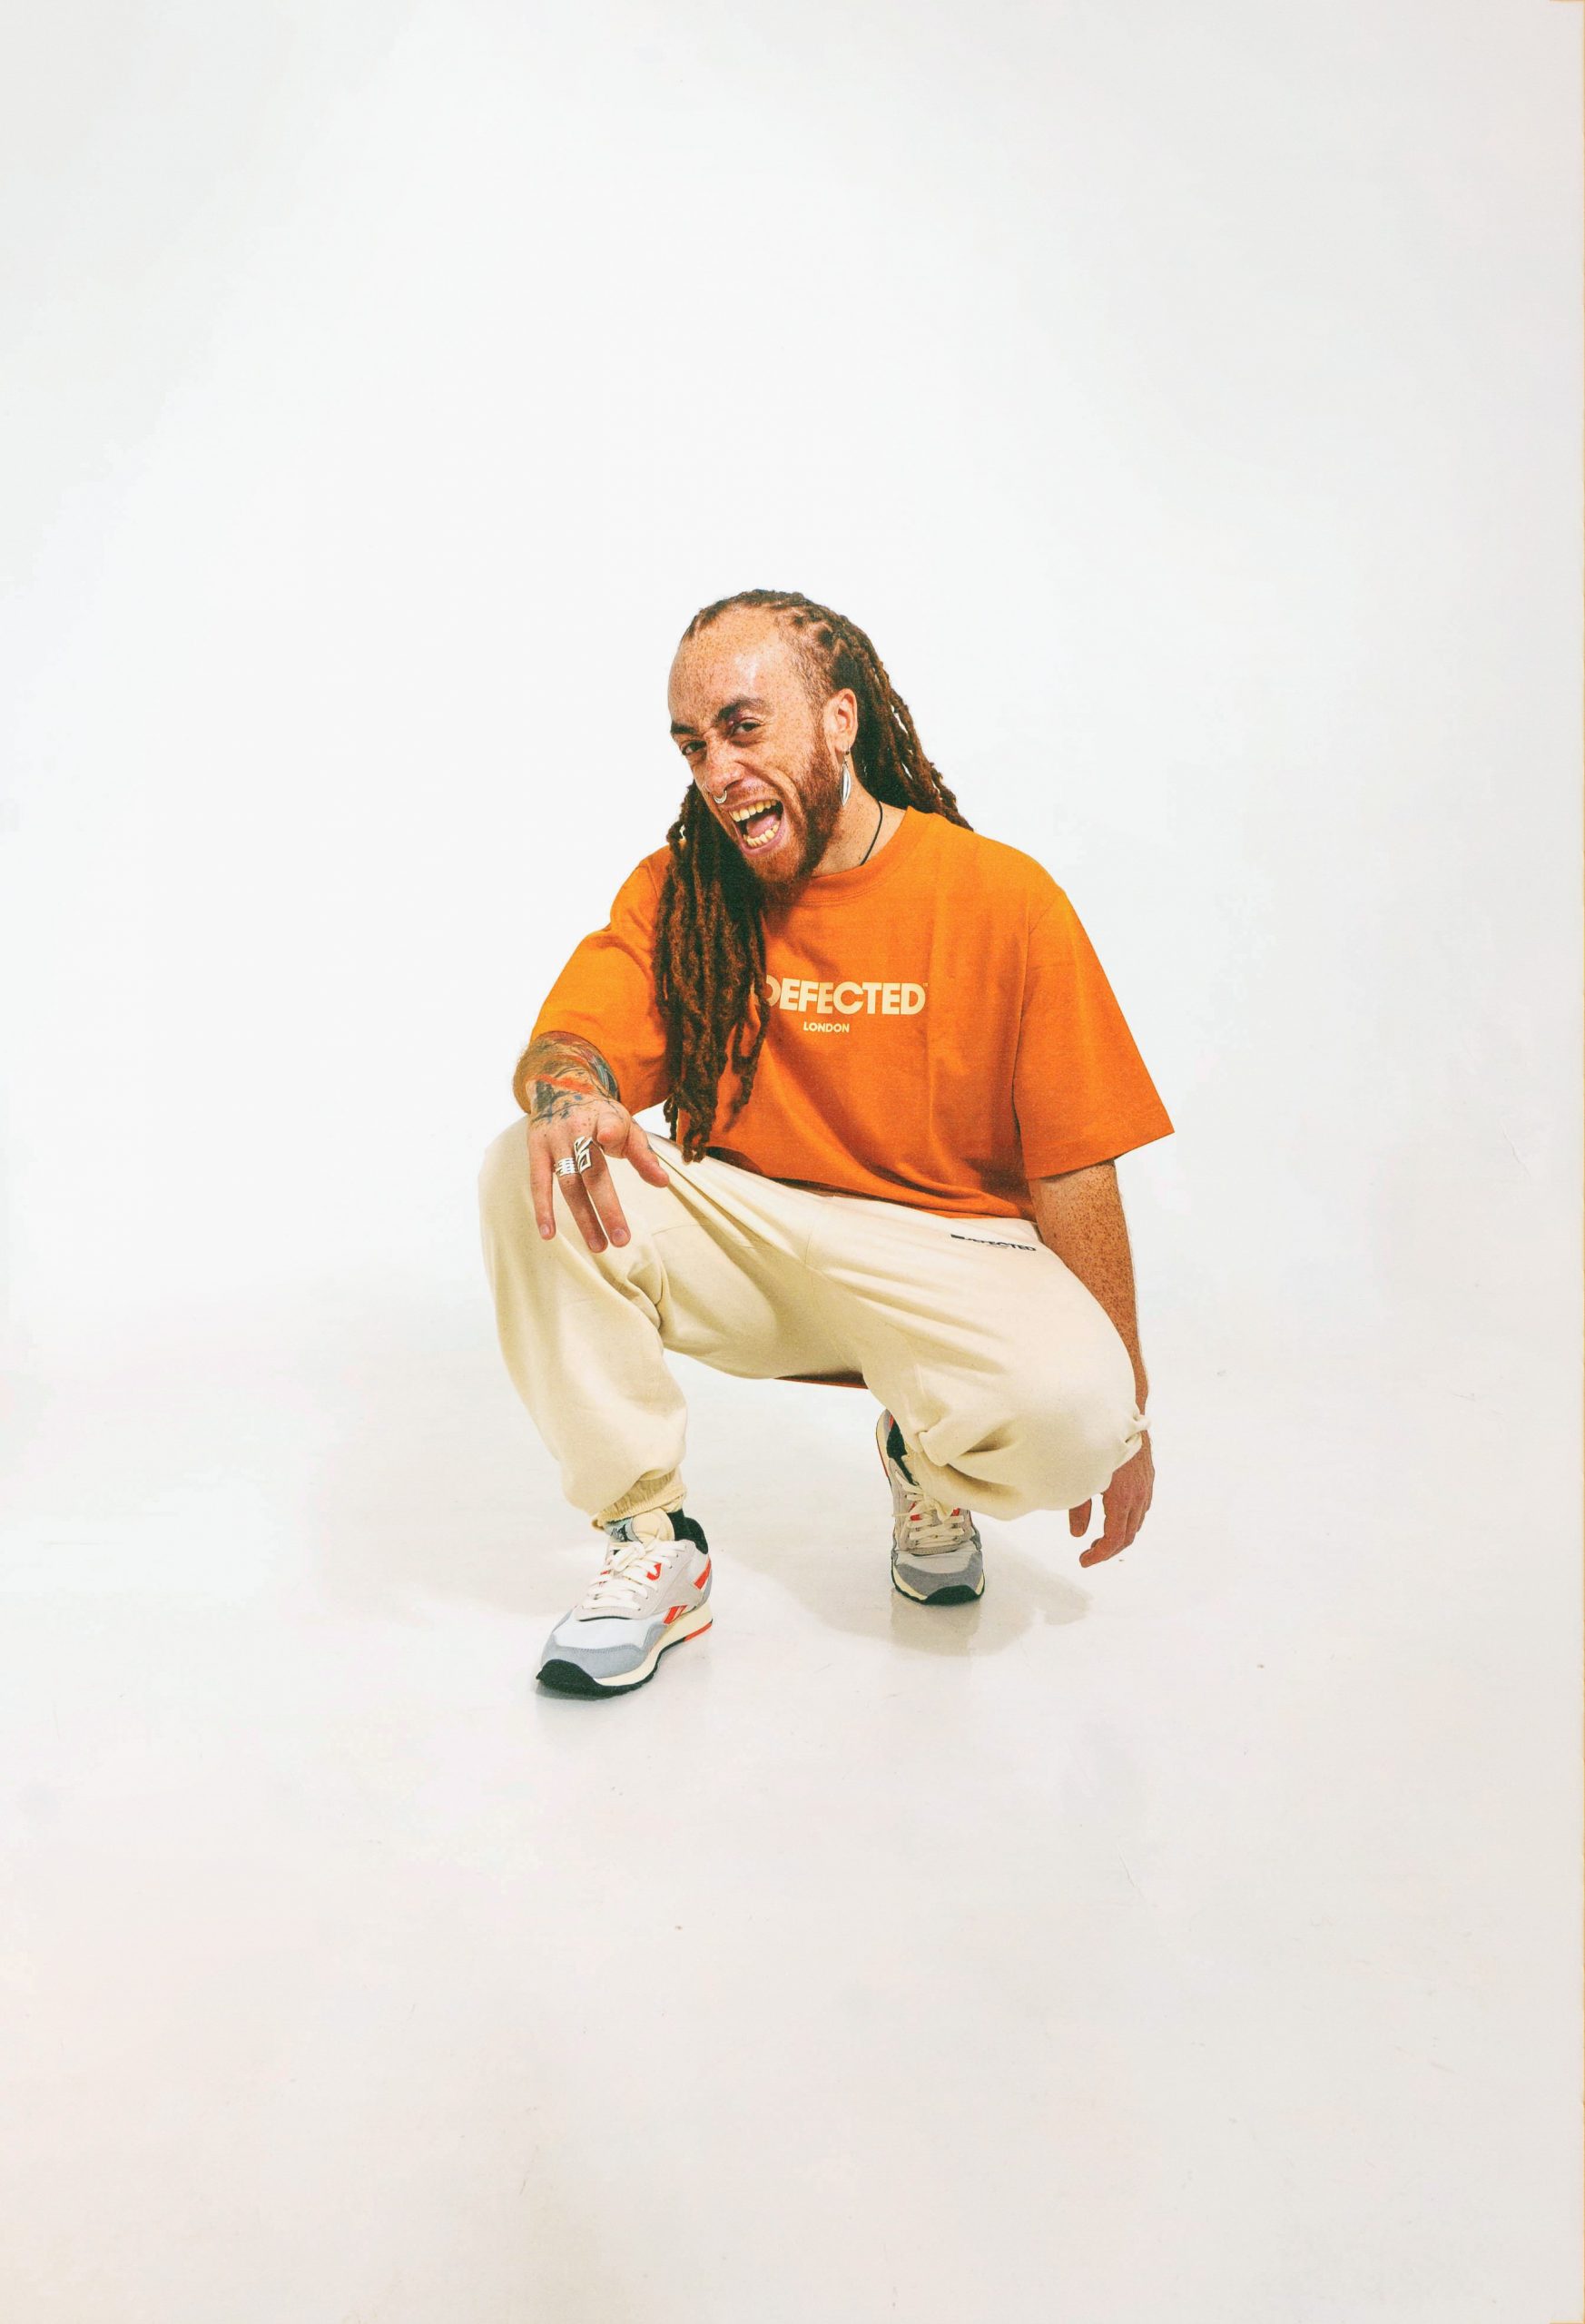 image of Frankie. Frankie is wearing a bright orange top with white trouser and his distinctive long red dreads. He is crouching down in front of a white background. Credit to @minaenea